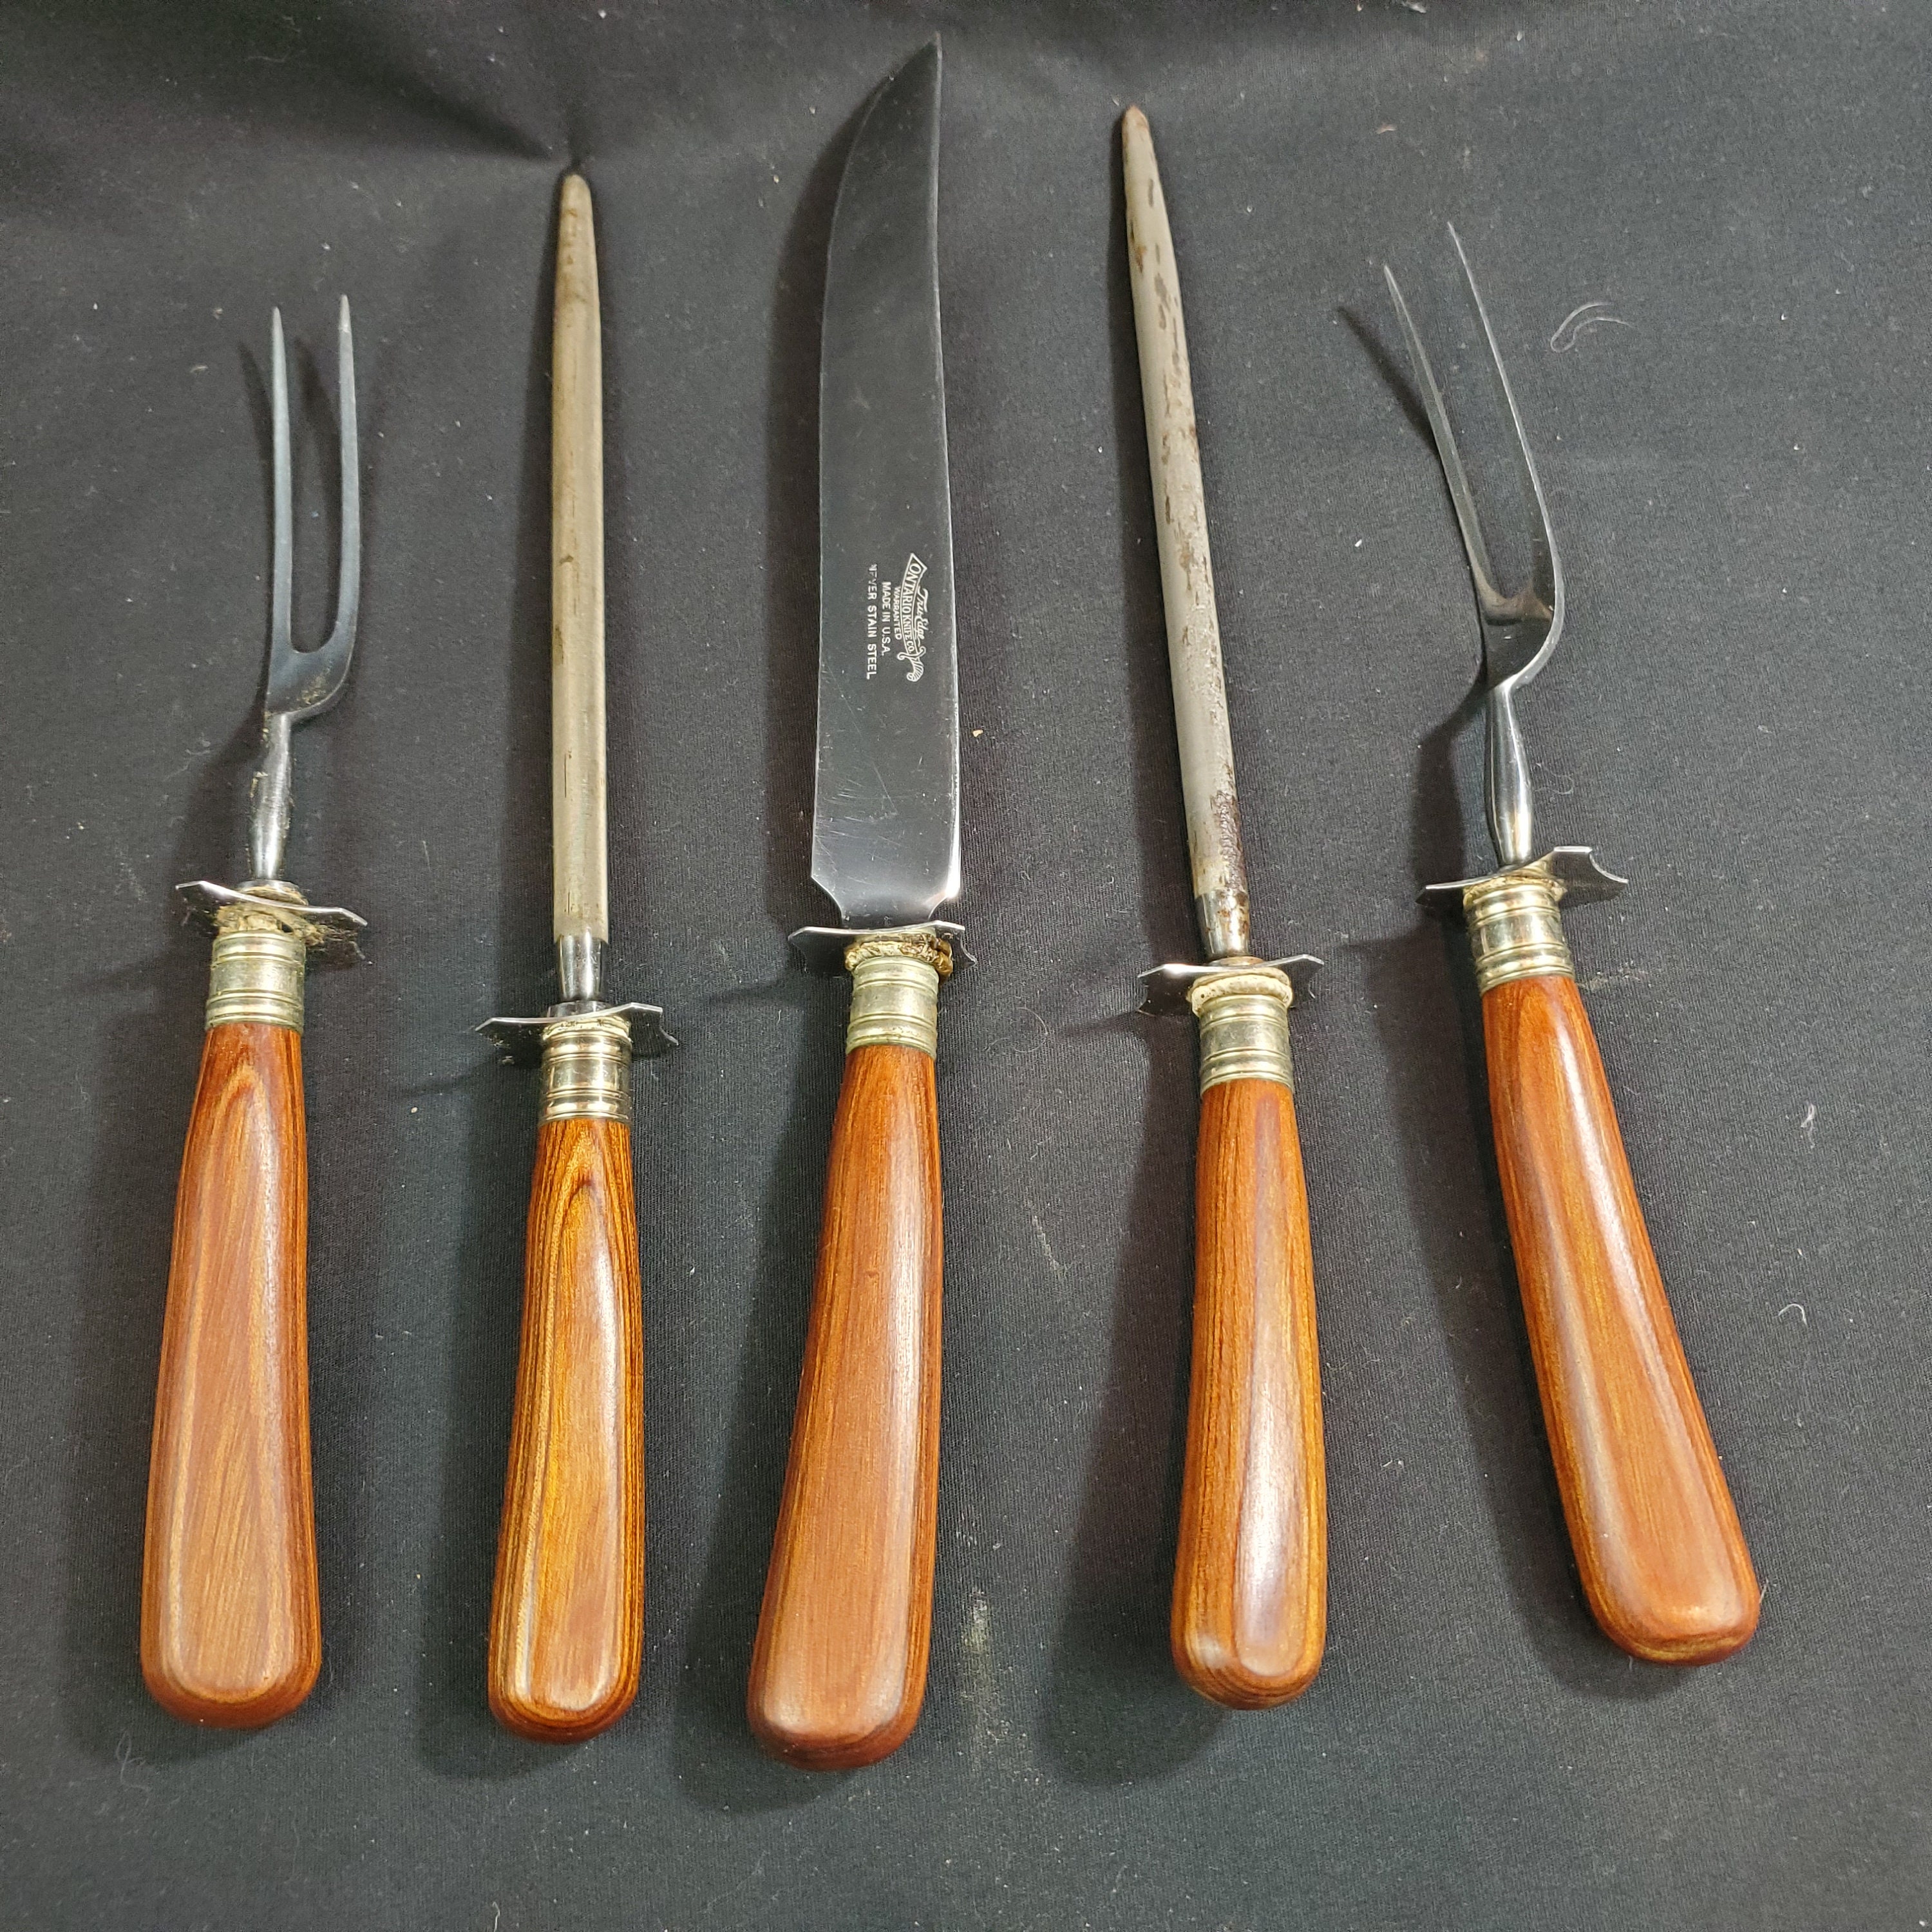 Old Hickory Block Set 7220 Five Carbon Steel Kitchen Knives with Hardwood Block  USA Made